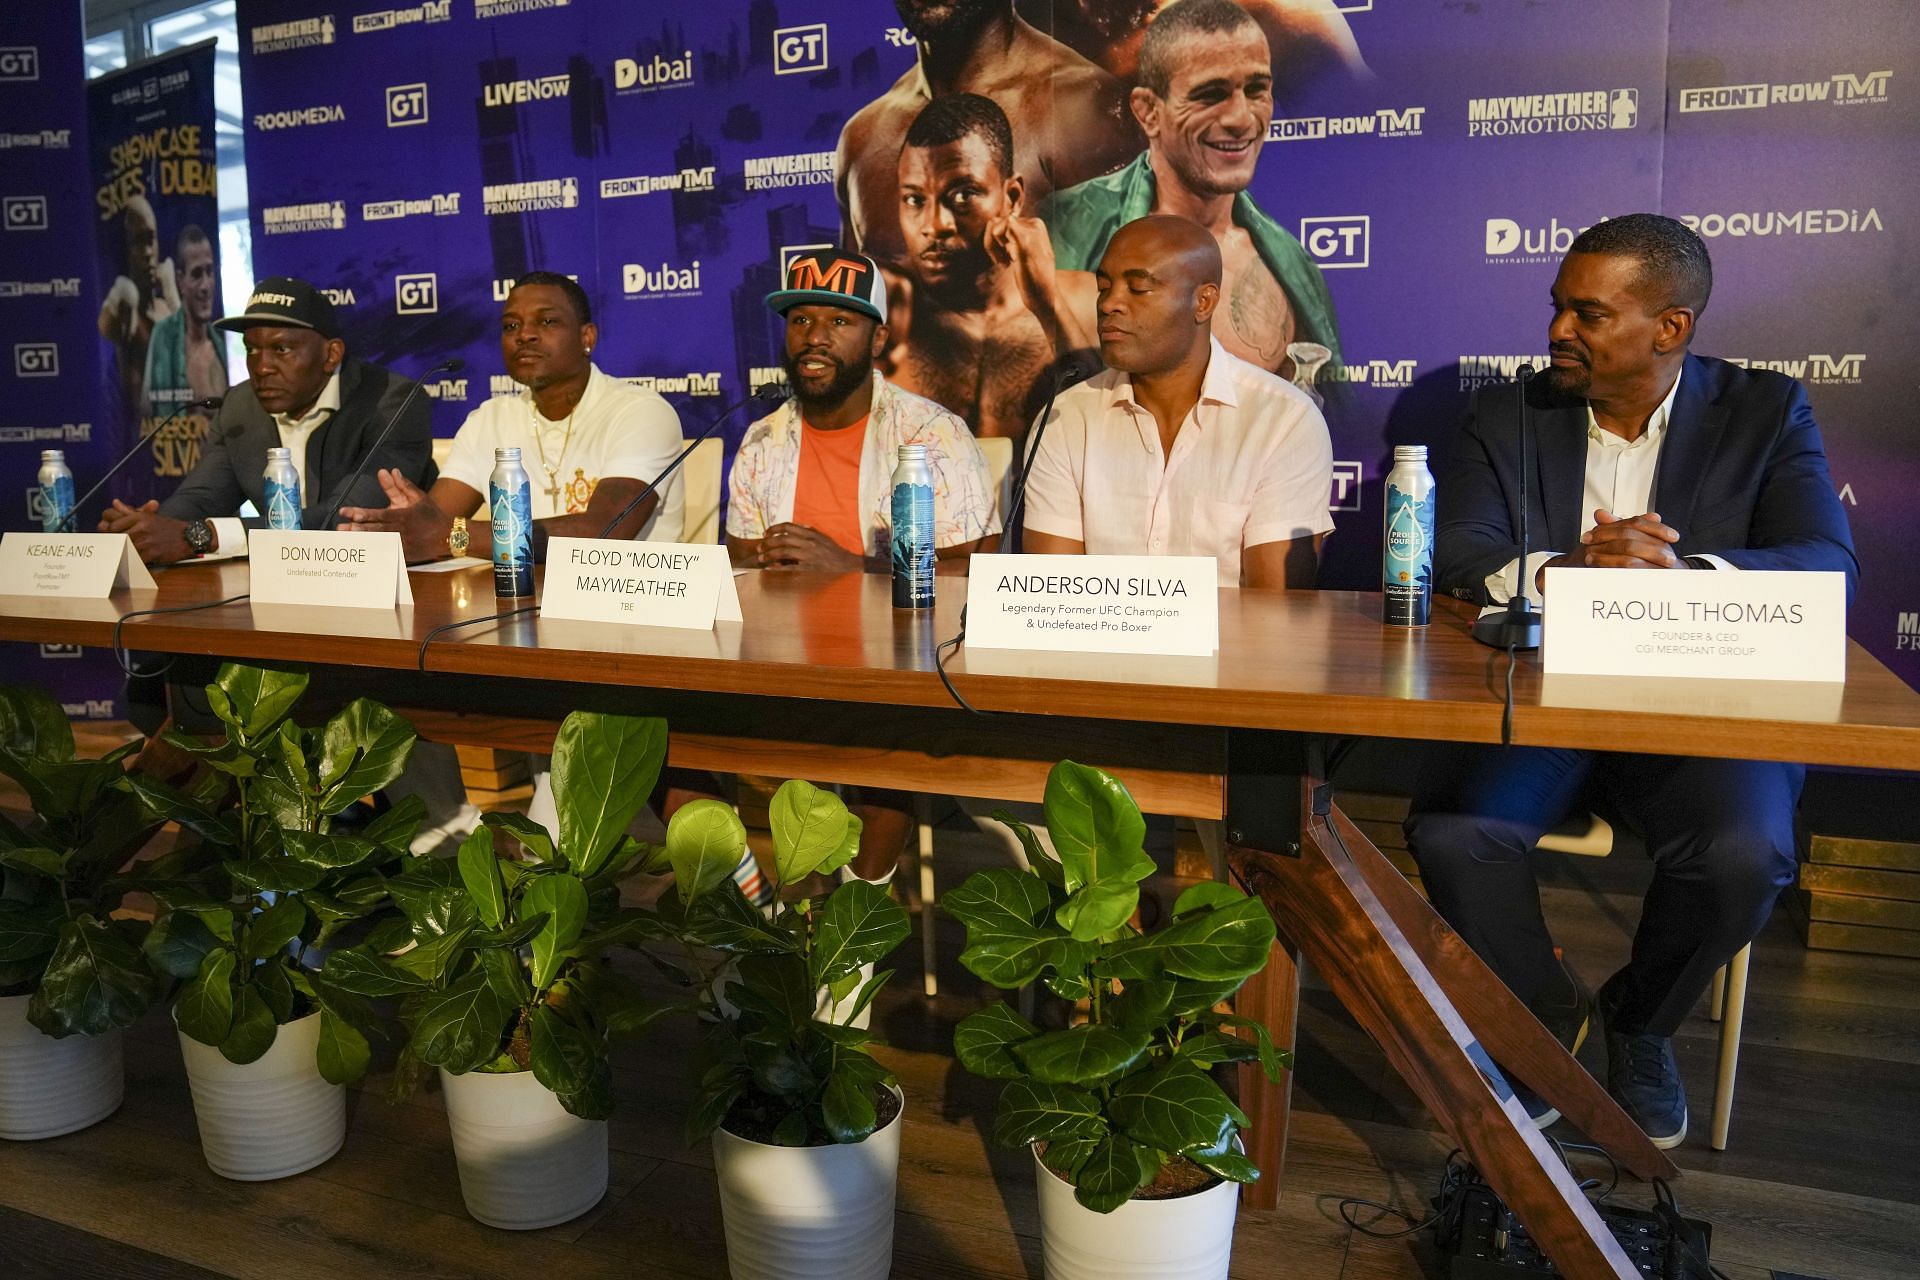 Floyd Mayweather Jr. vs Don Moore - Press Conference